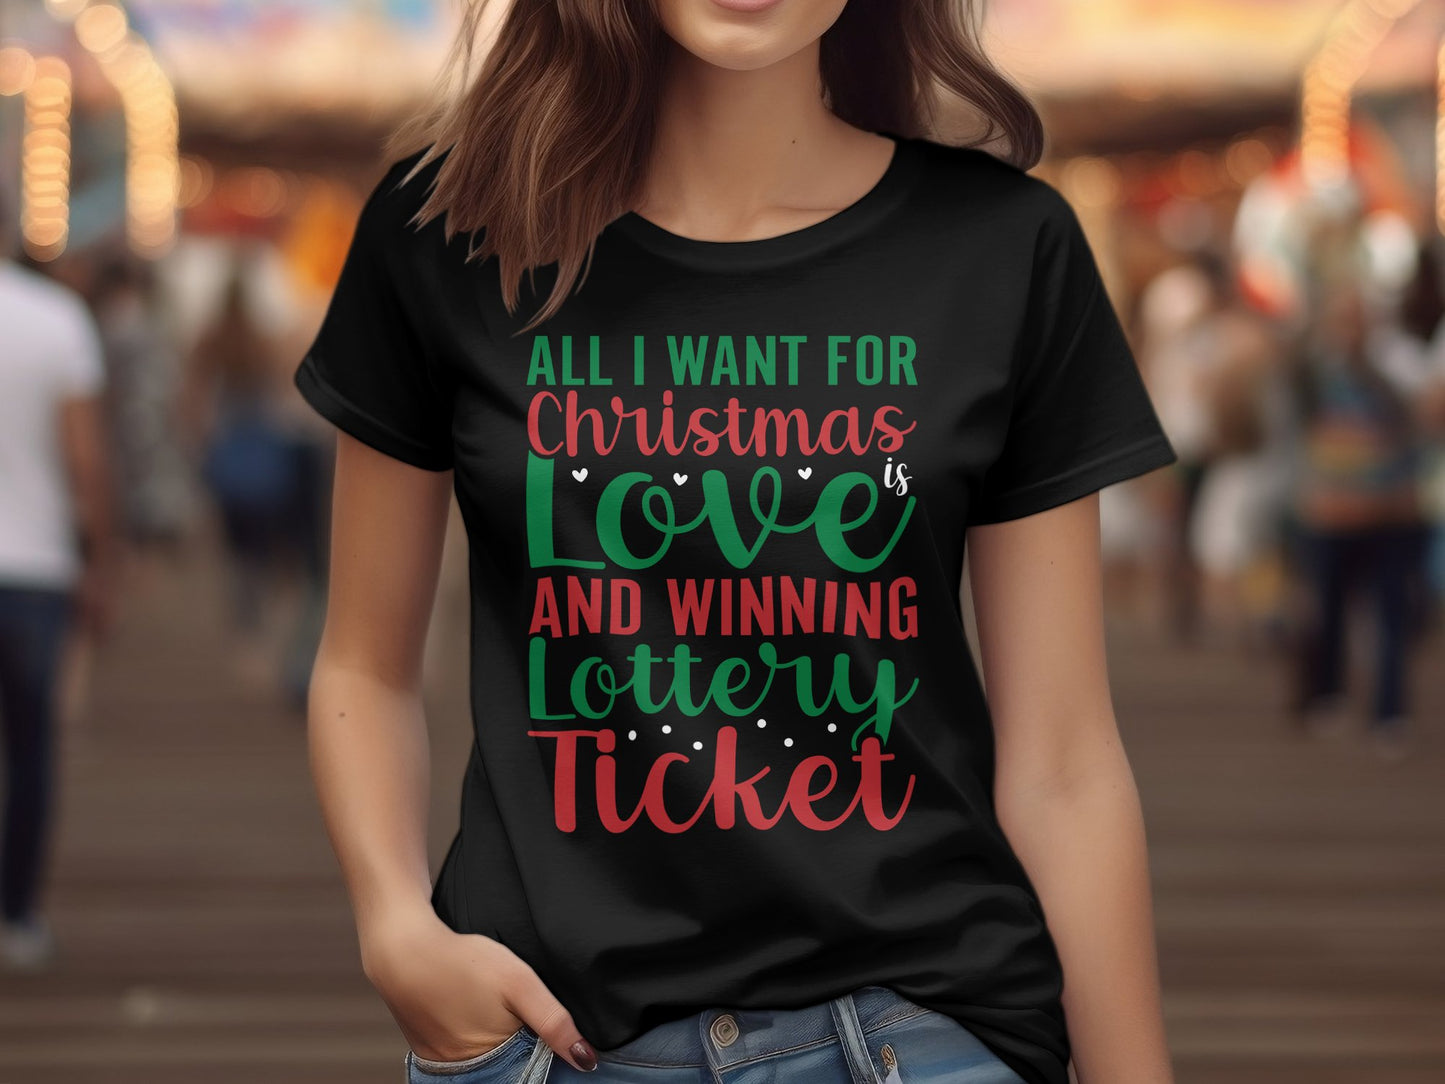 All I want for Christmas Love and Winning Lottery Ticket (Christmas T-shirt)